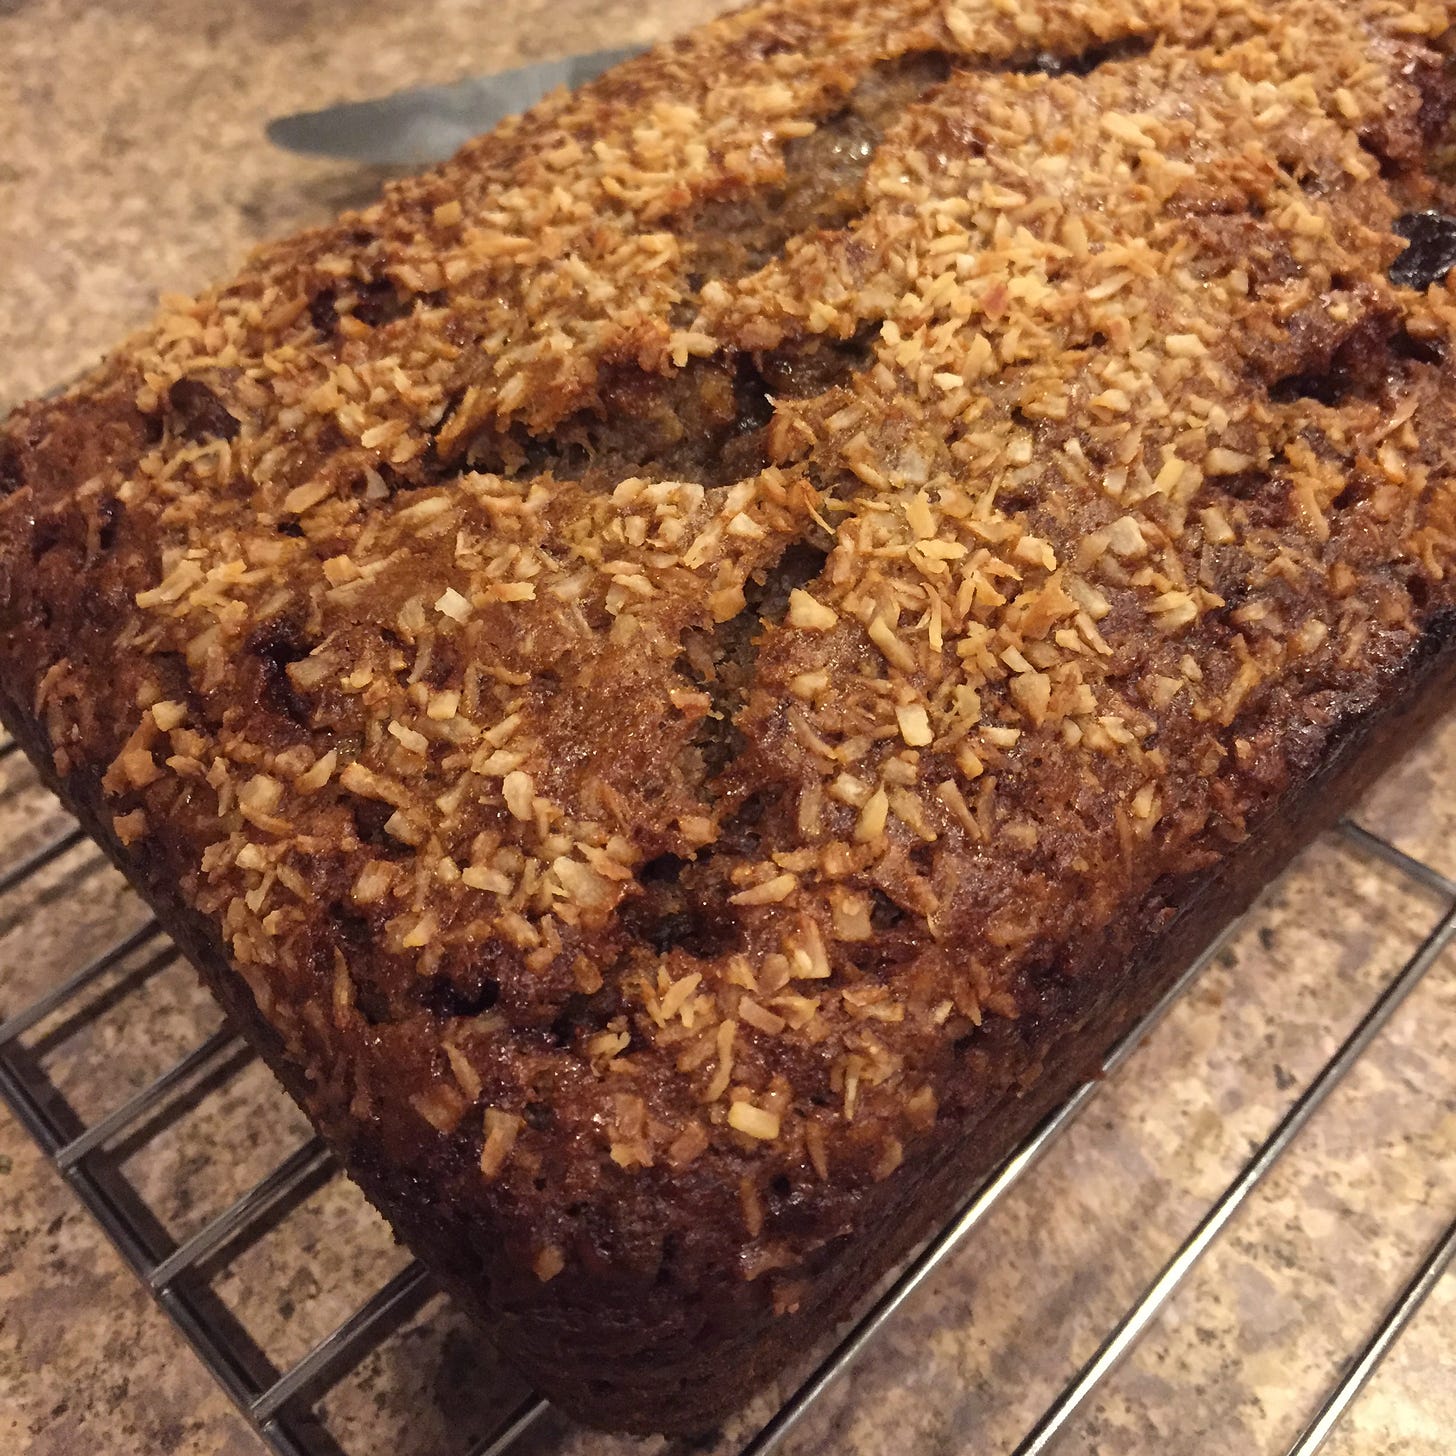 On a cooling rack, a brown loaf of banana bread with toasted coconut and a top that has cracked in places.